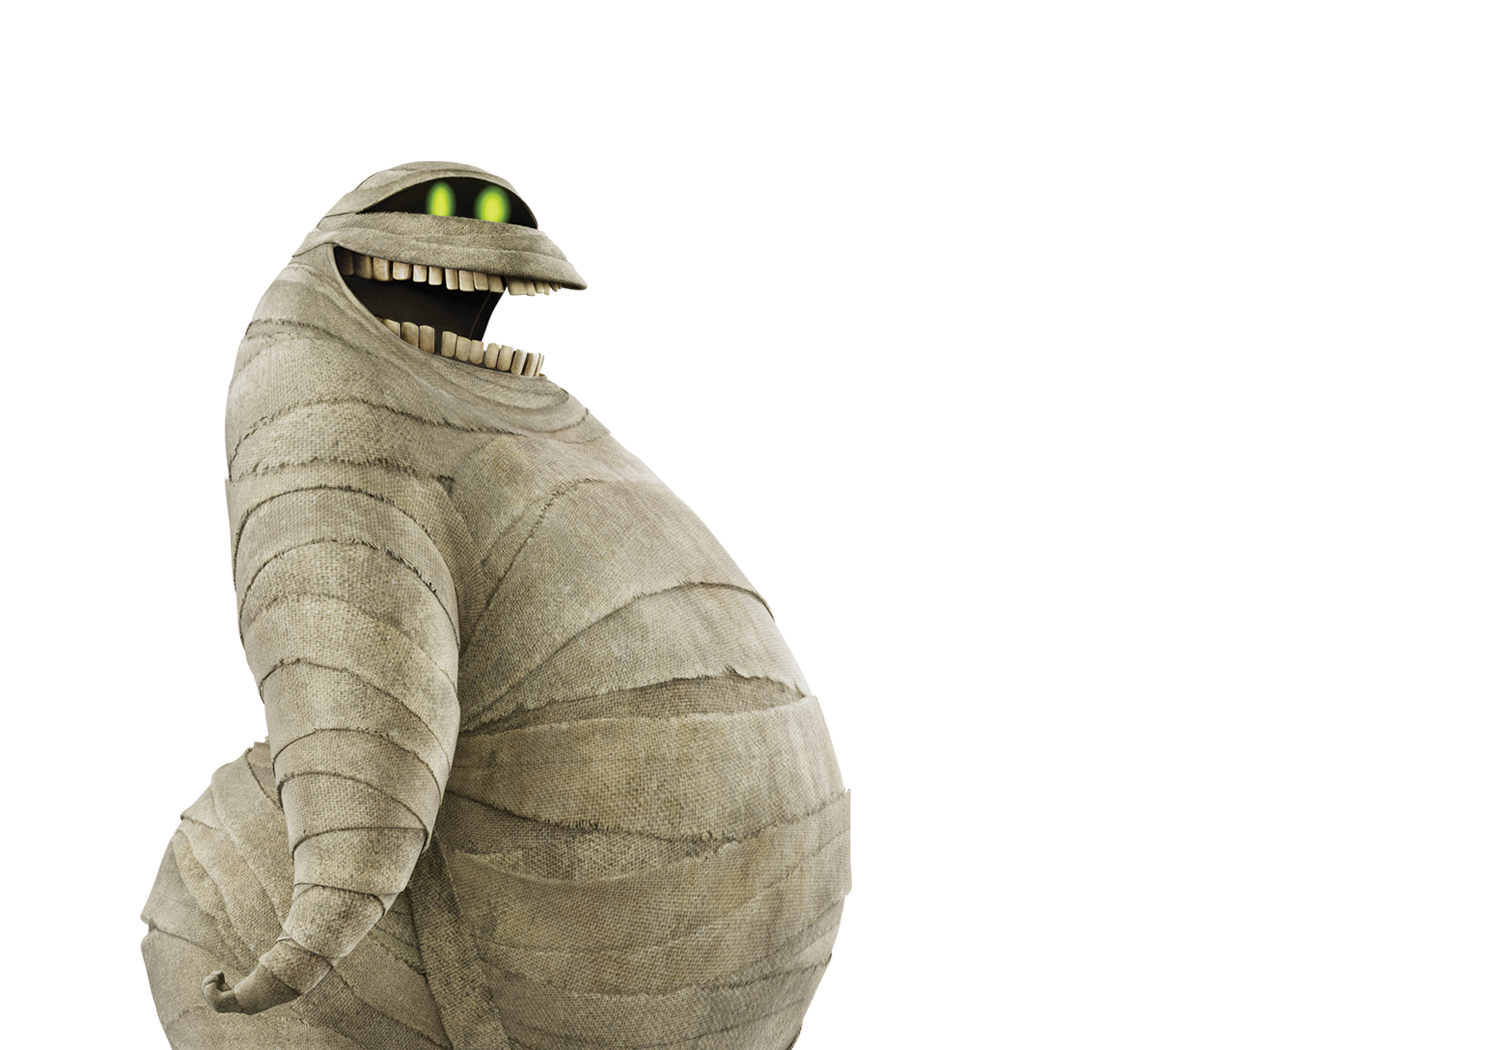 Wrapped Mummy PNG Image Transparent Background